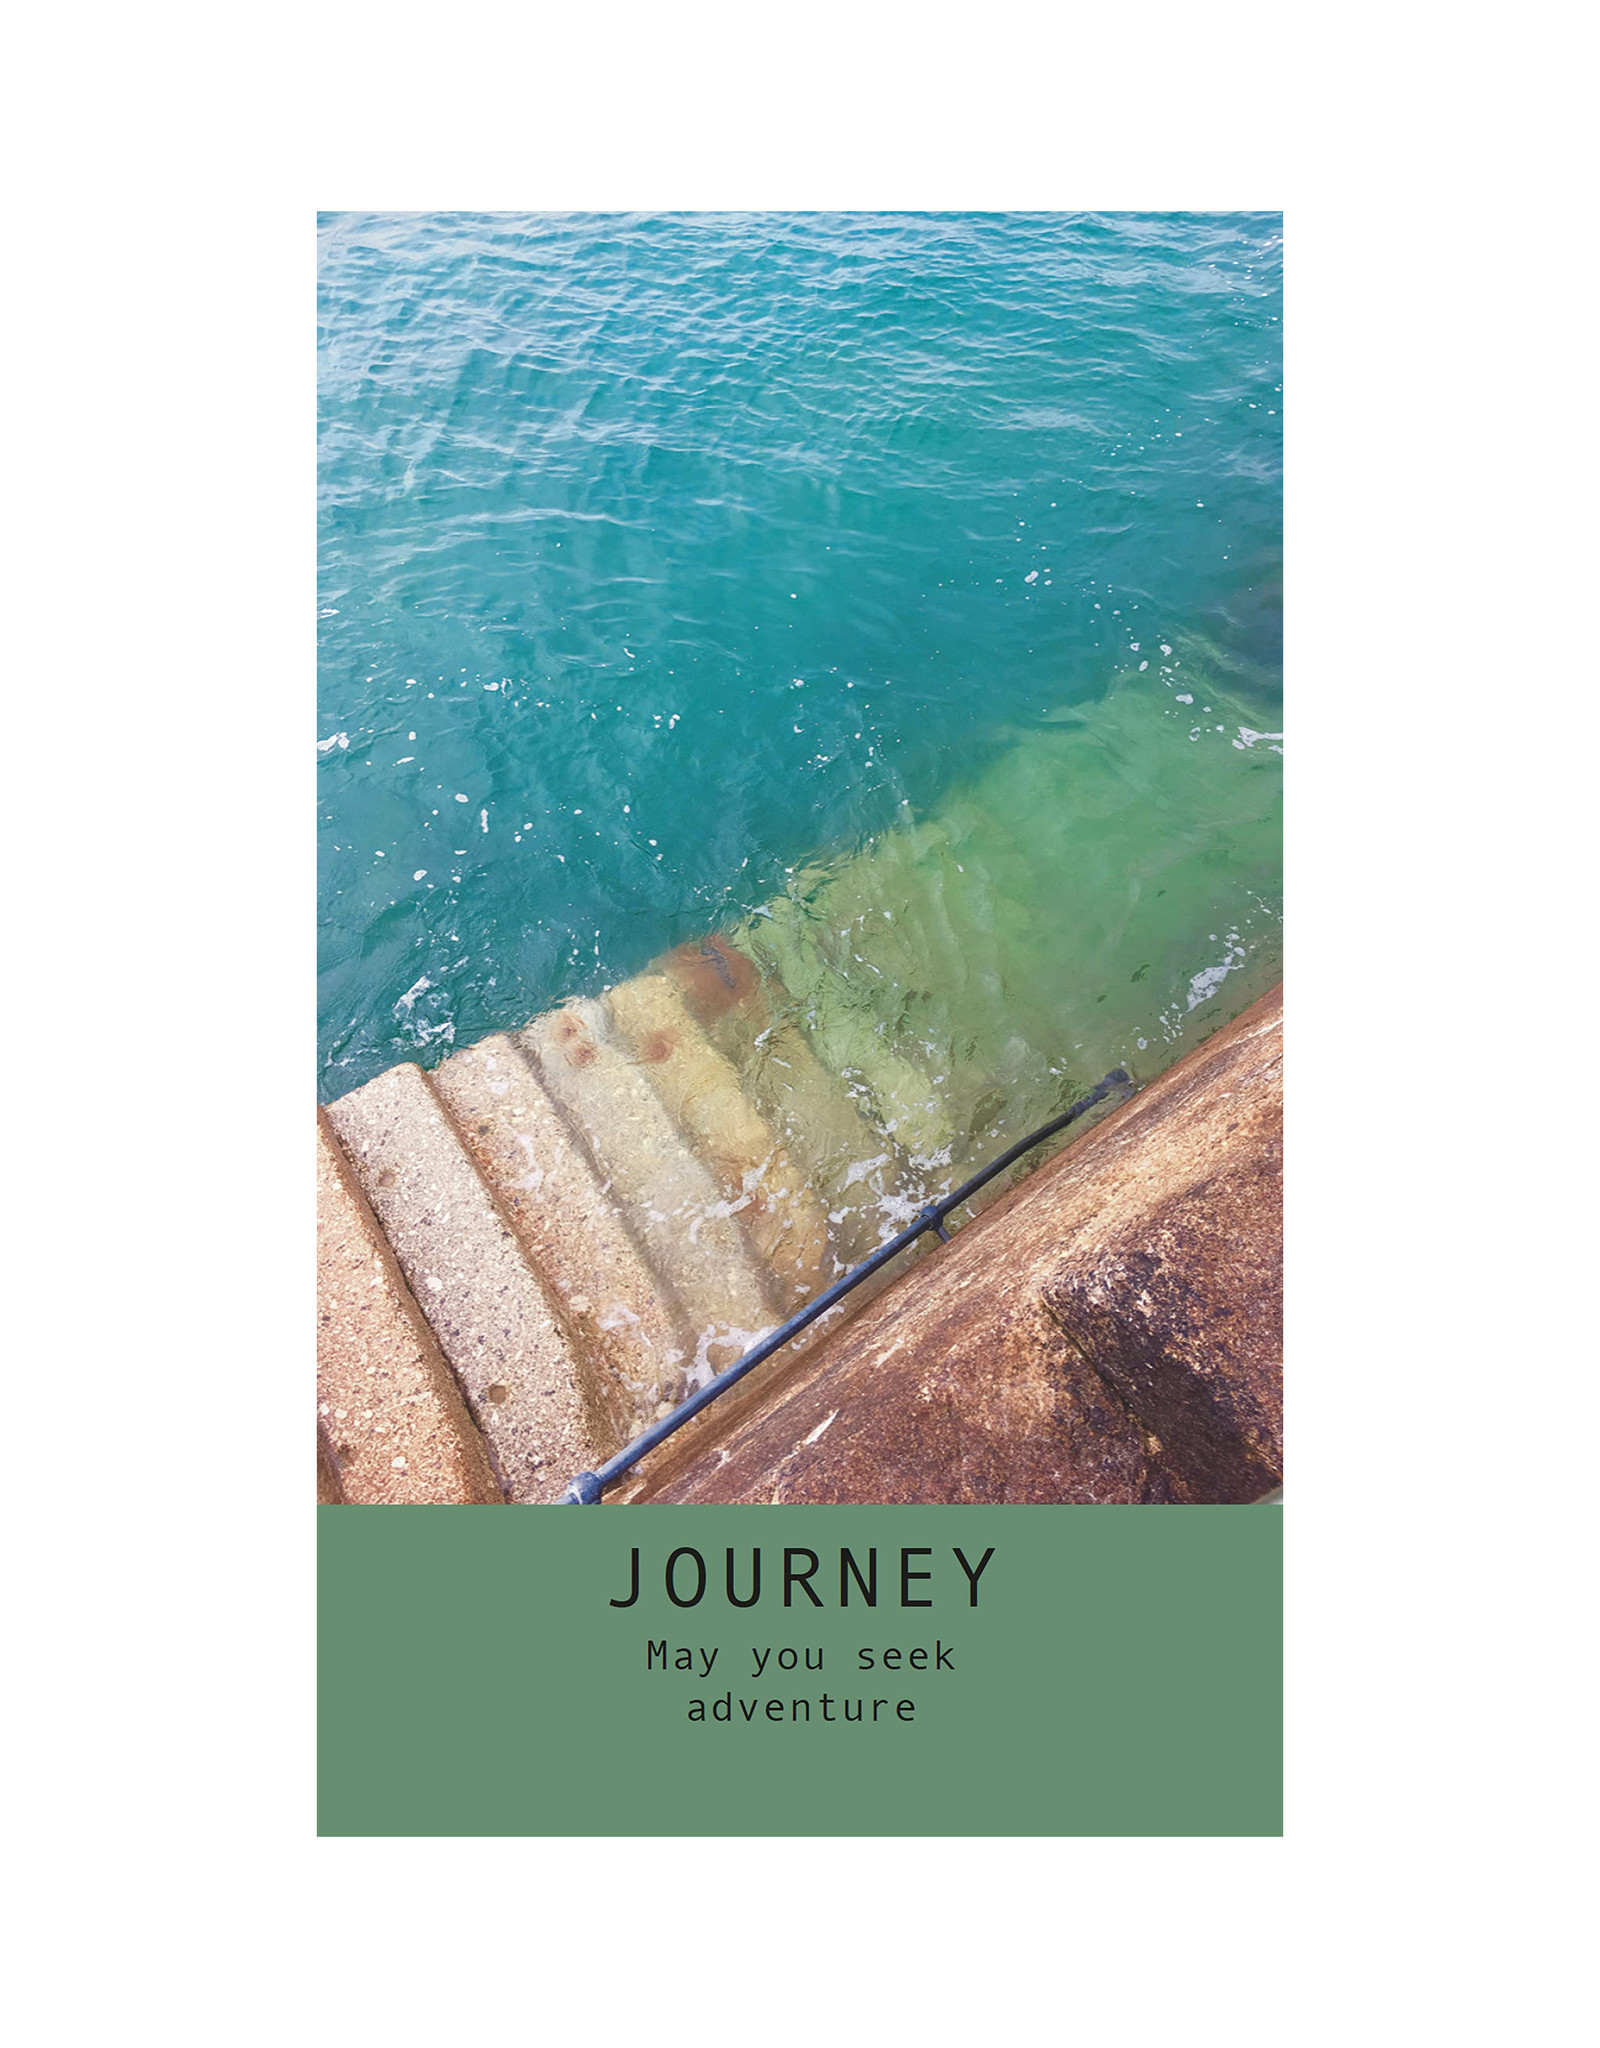 Sea Soul Journeys Oracle Cards